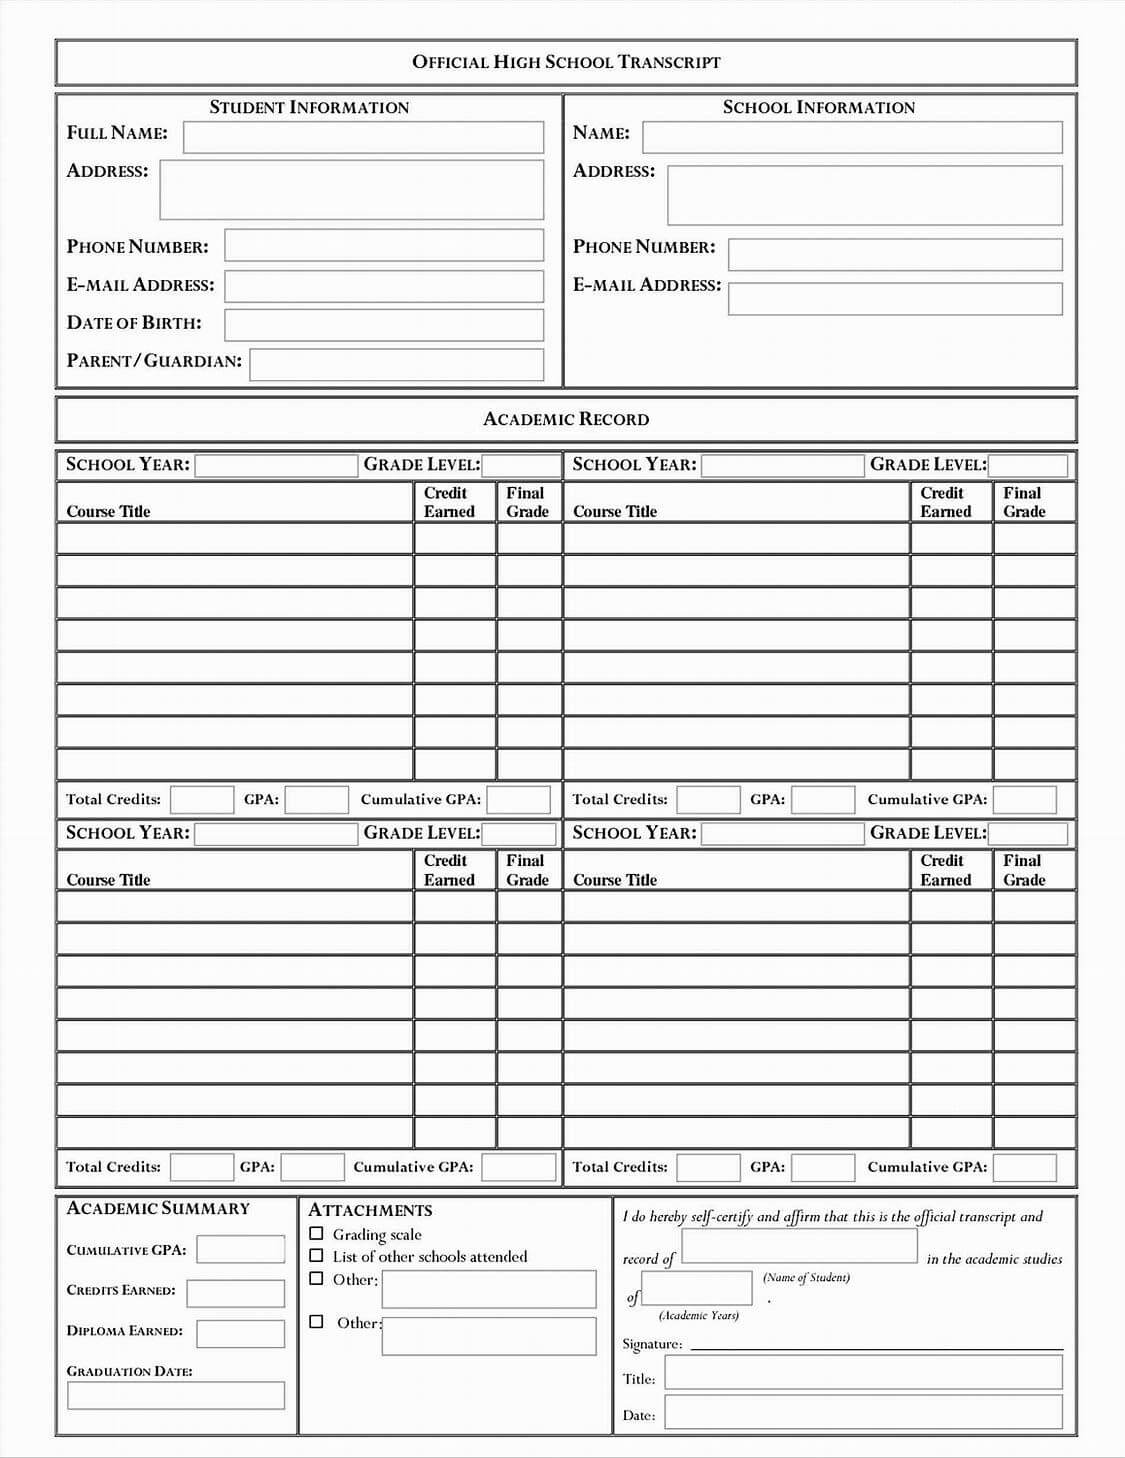 Image Result For Middle School Transcript Template | School In Homeschool Report Card Template Middle School